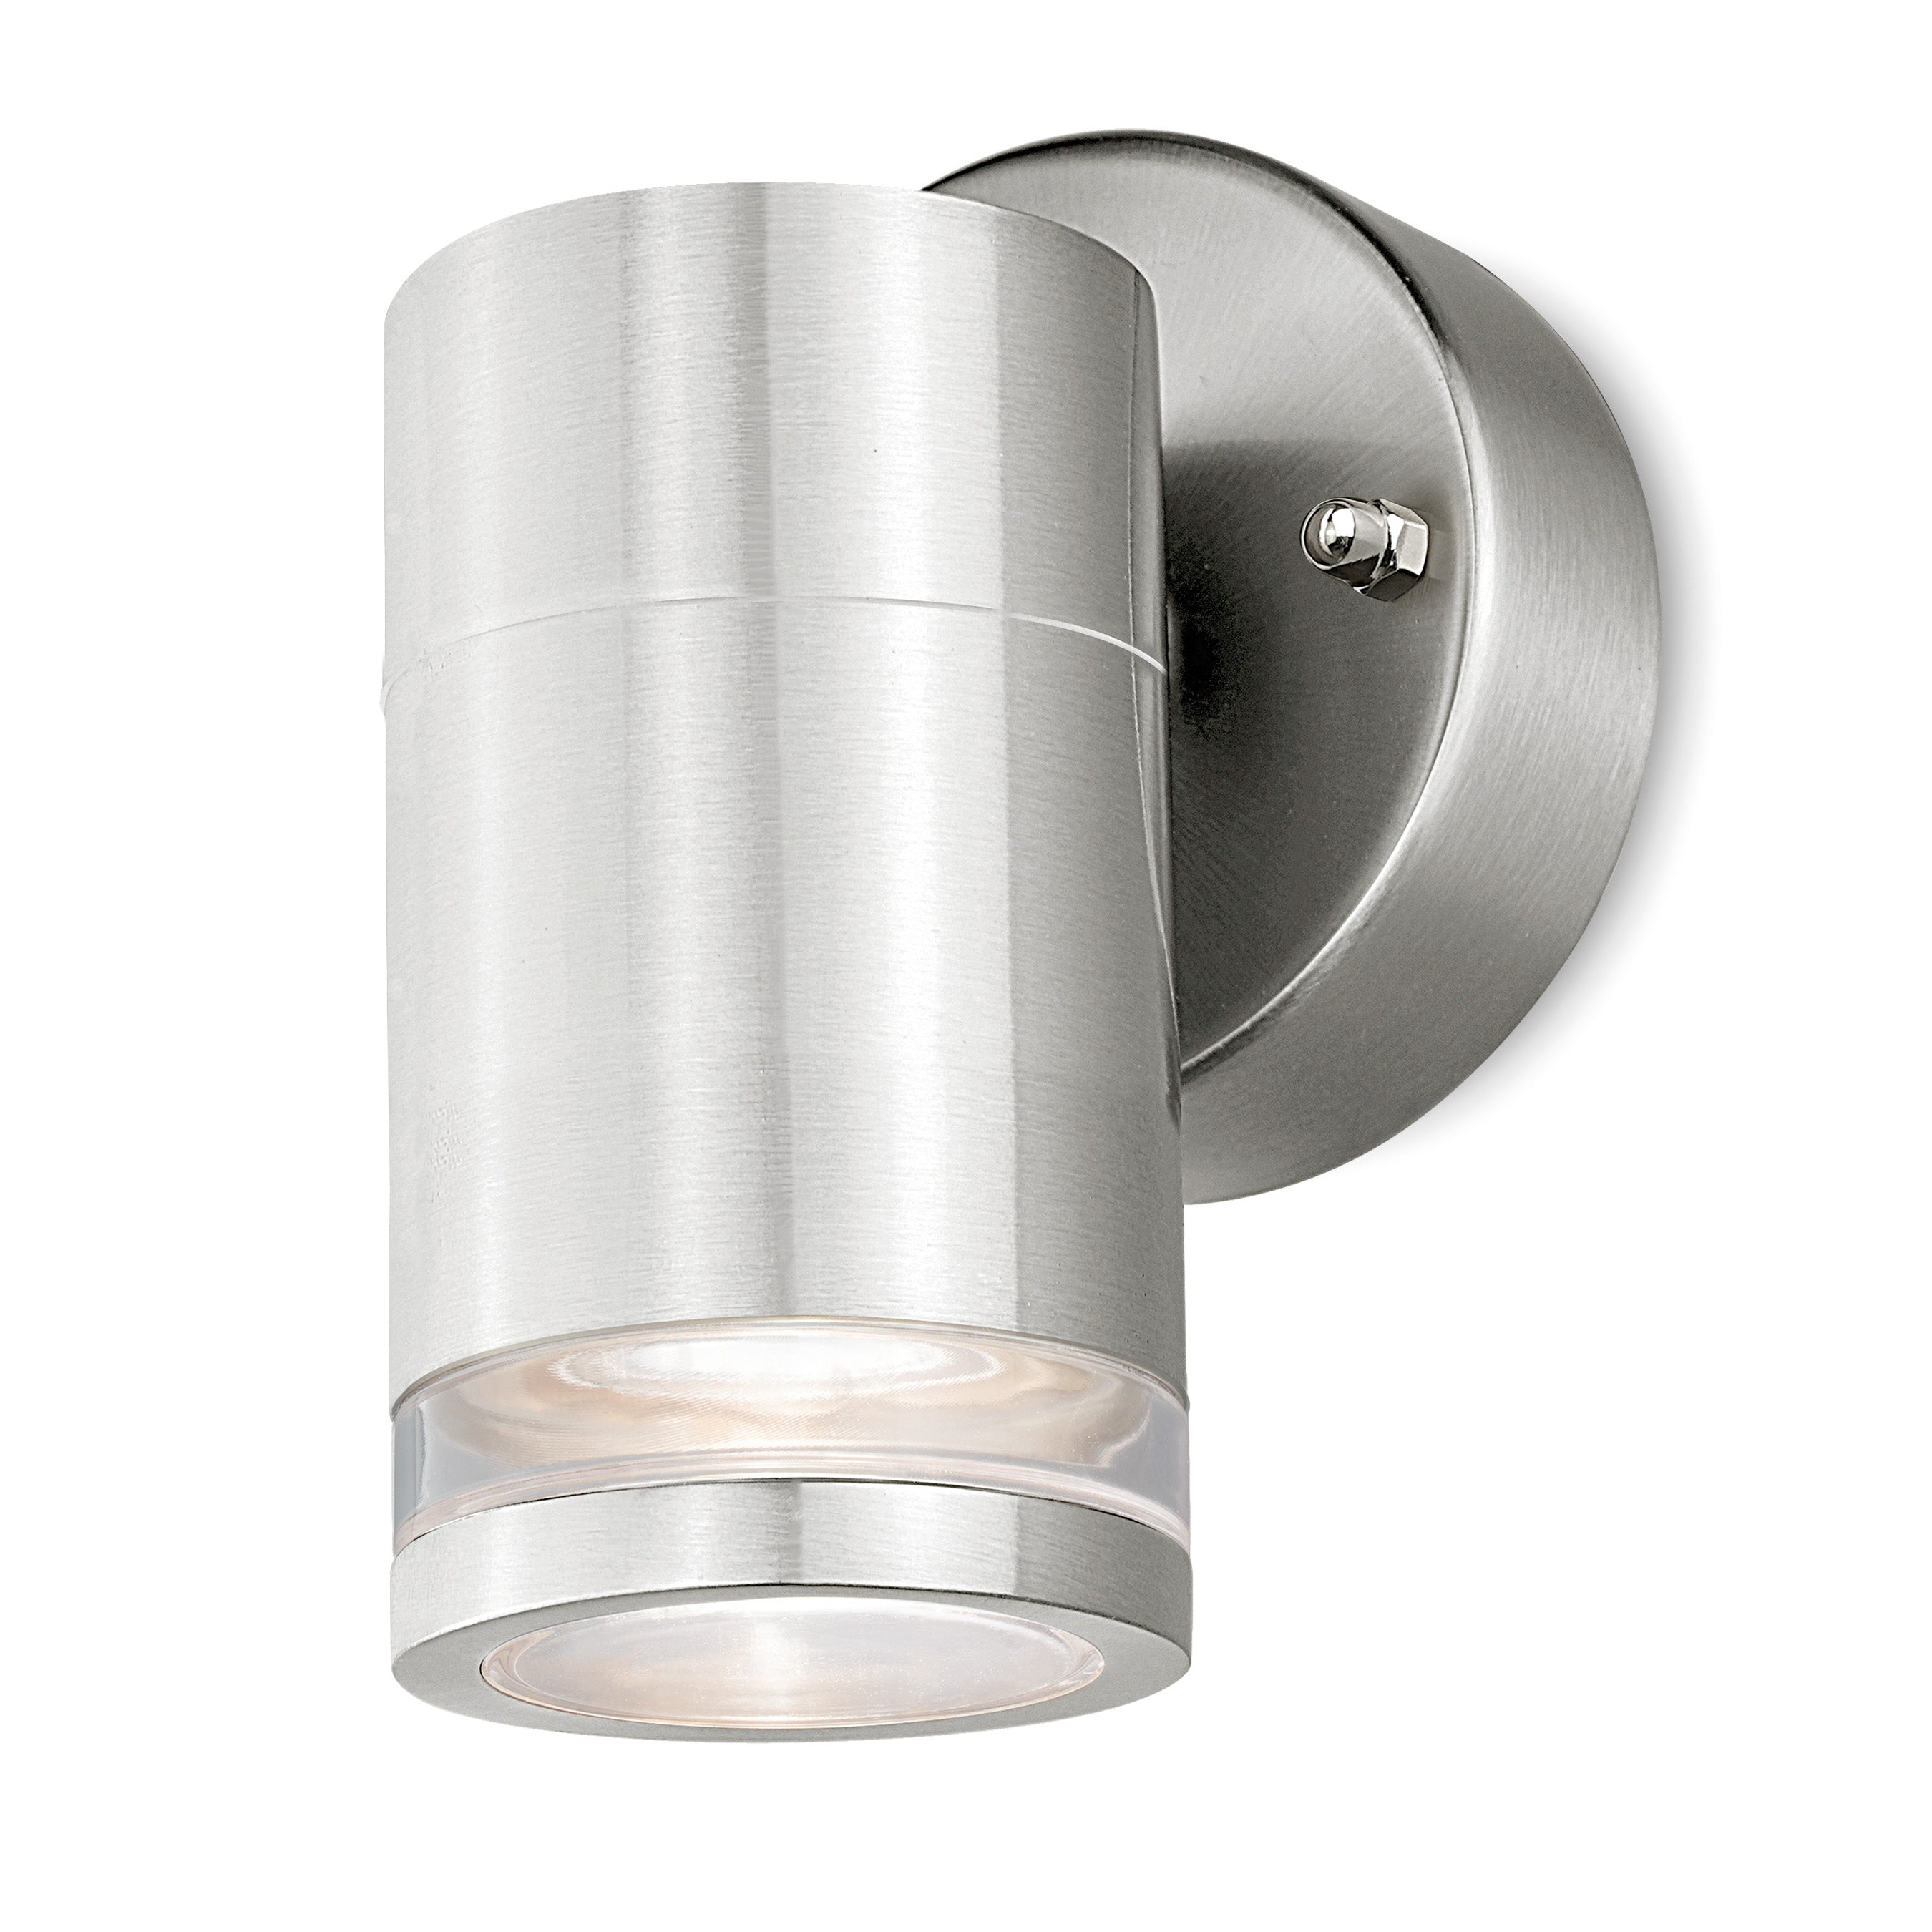 4lite Marinus GU10 Single Direction Outdoor Wall Light without PIR - Stainless Steel (Single)